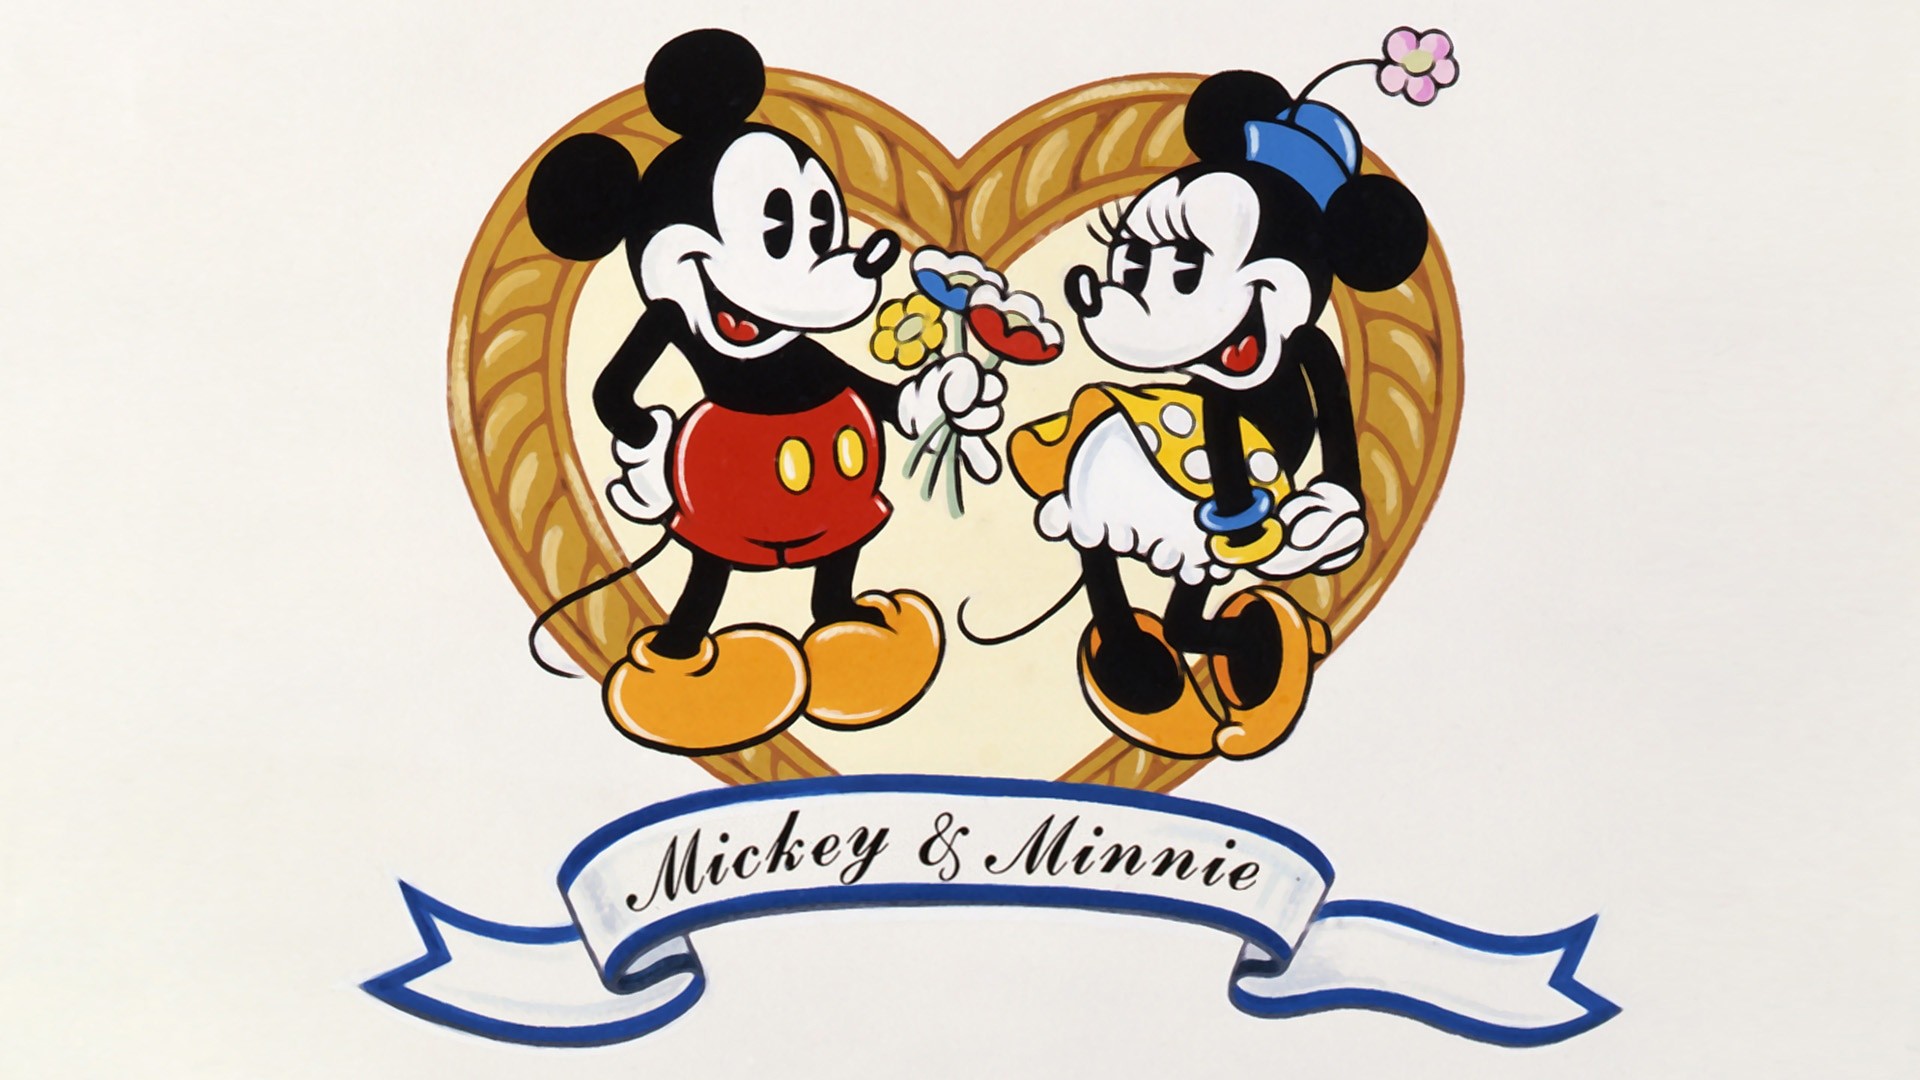 Download Love is Magical  Celebrate Valentines Day With Disney Wallpaper   Wallpaperscom